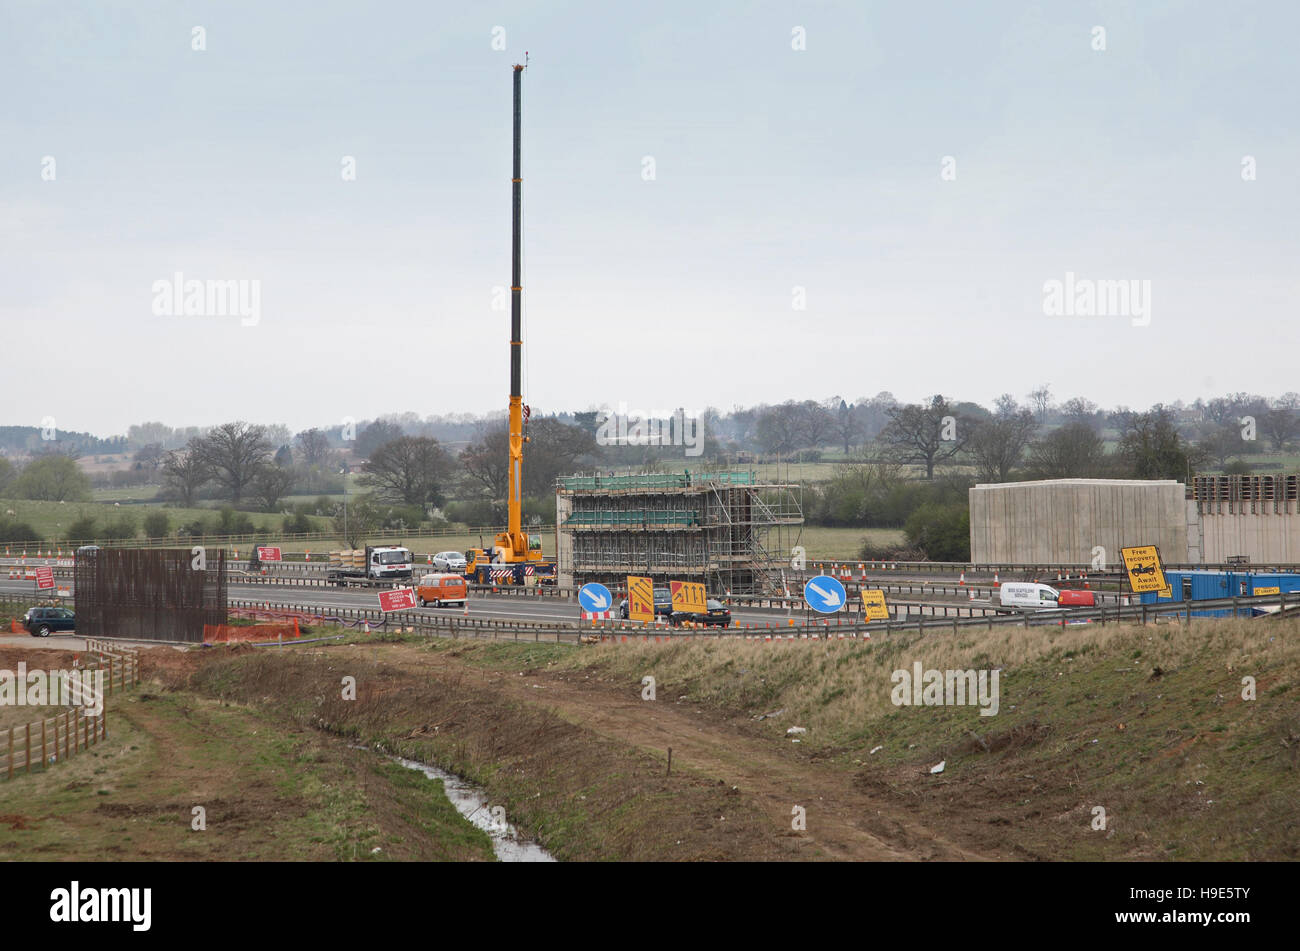 Construction of a new bridge for the A46 to span the M40 motorway, Oxfordshire, UK. Shows formwork for bridge piers and crane Stock Photo